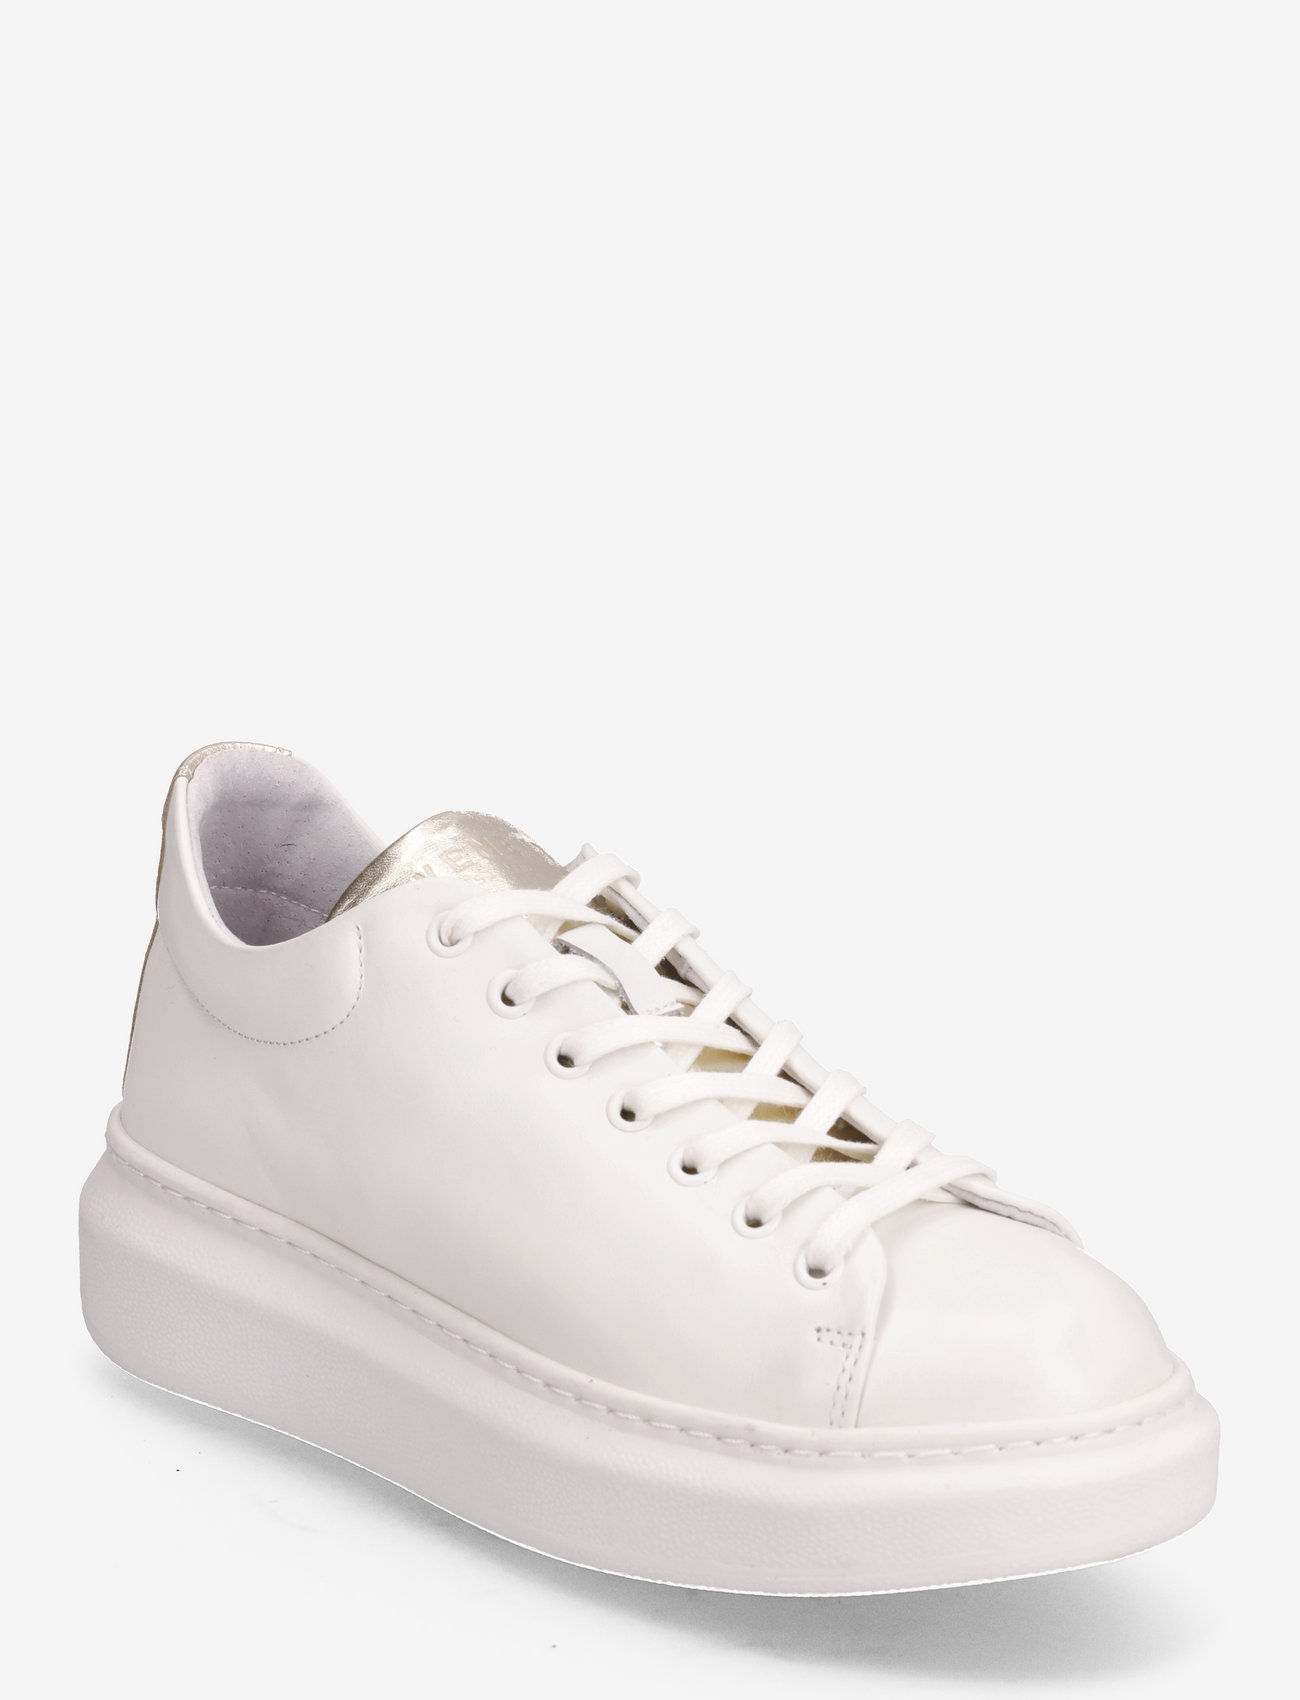 Pavement - Dee Metal - low top sneakers - white/gold - 0